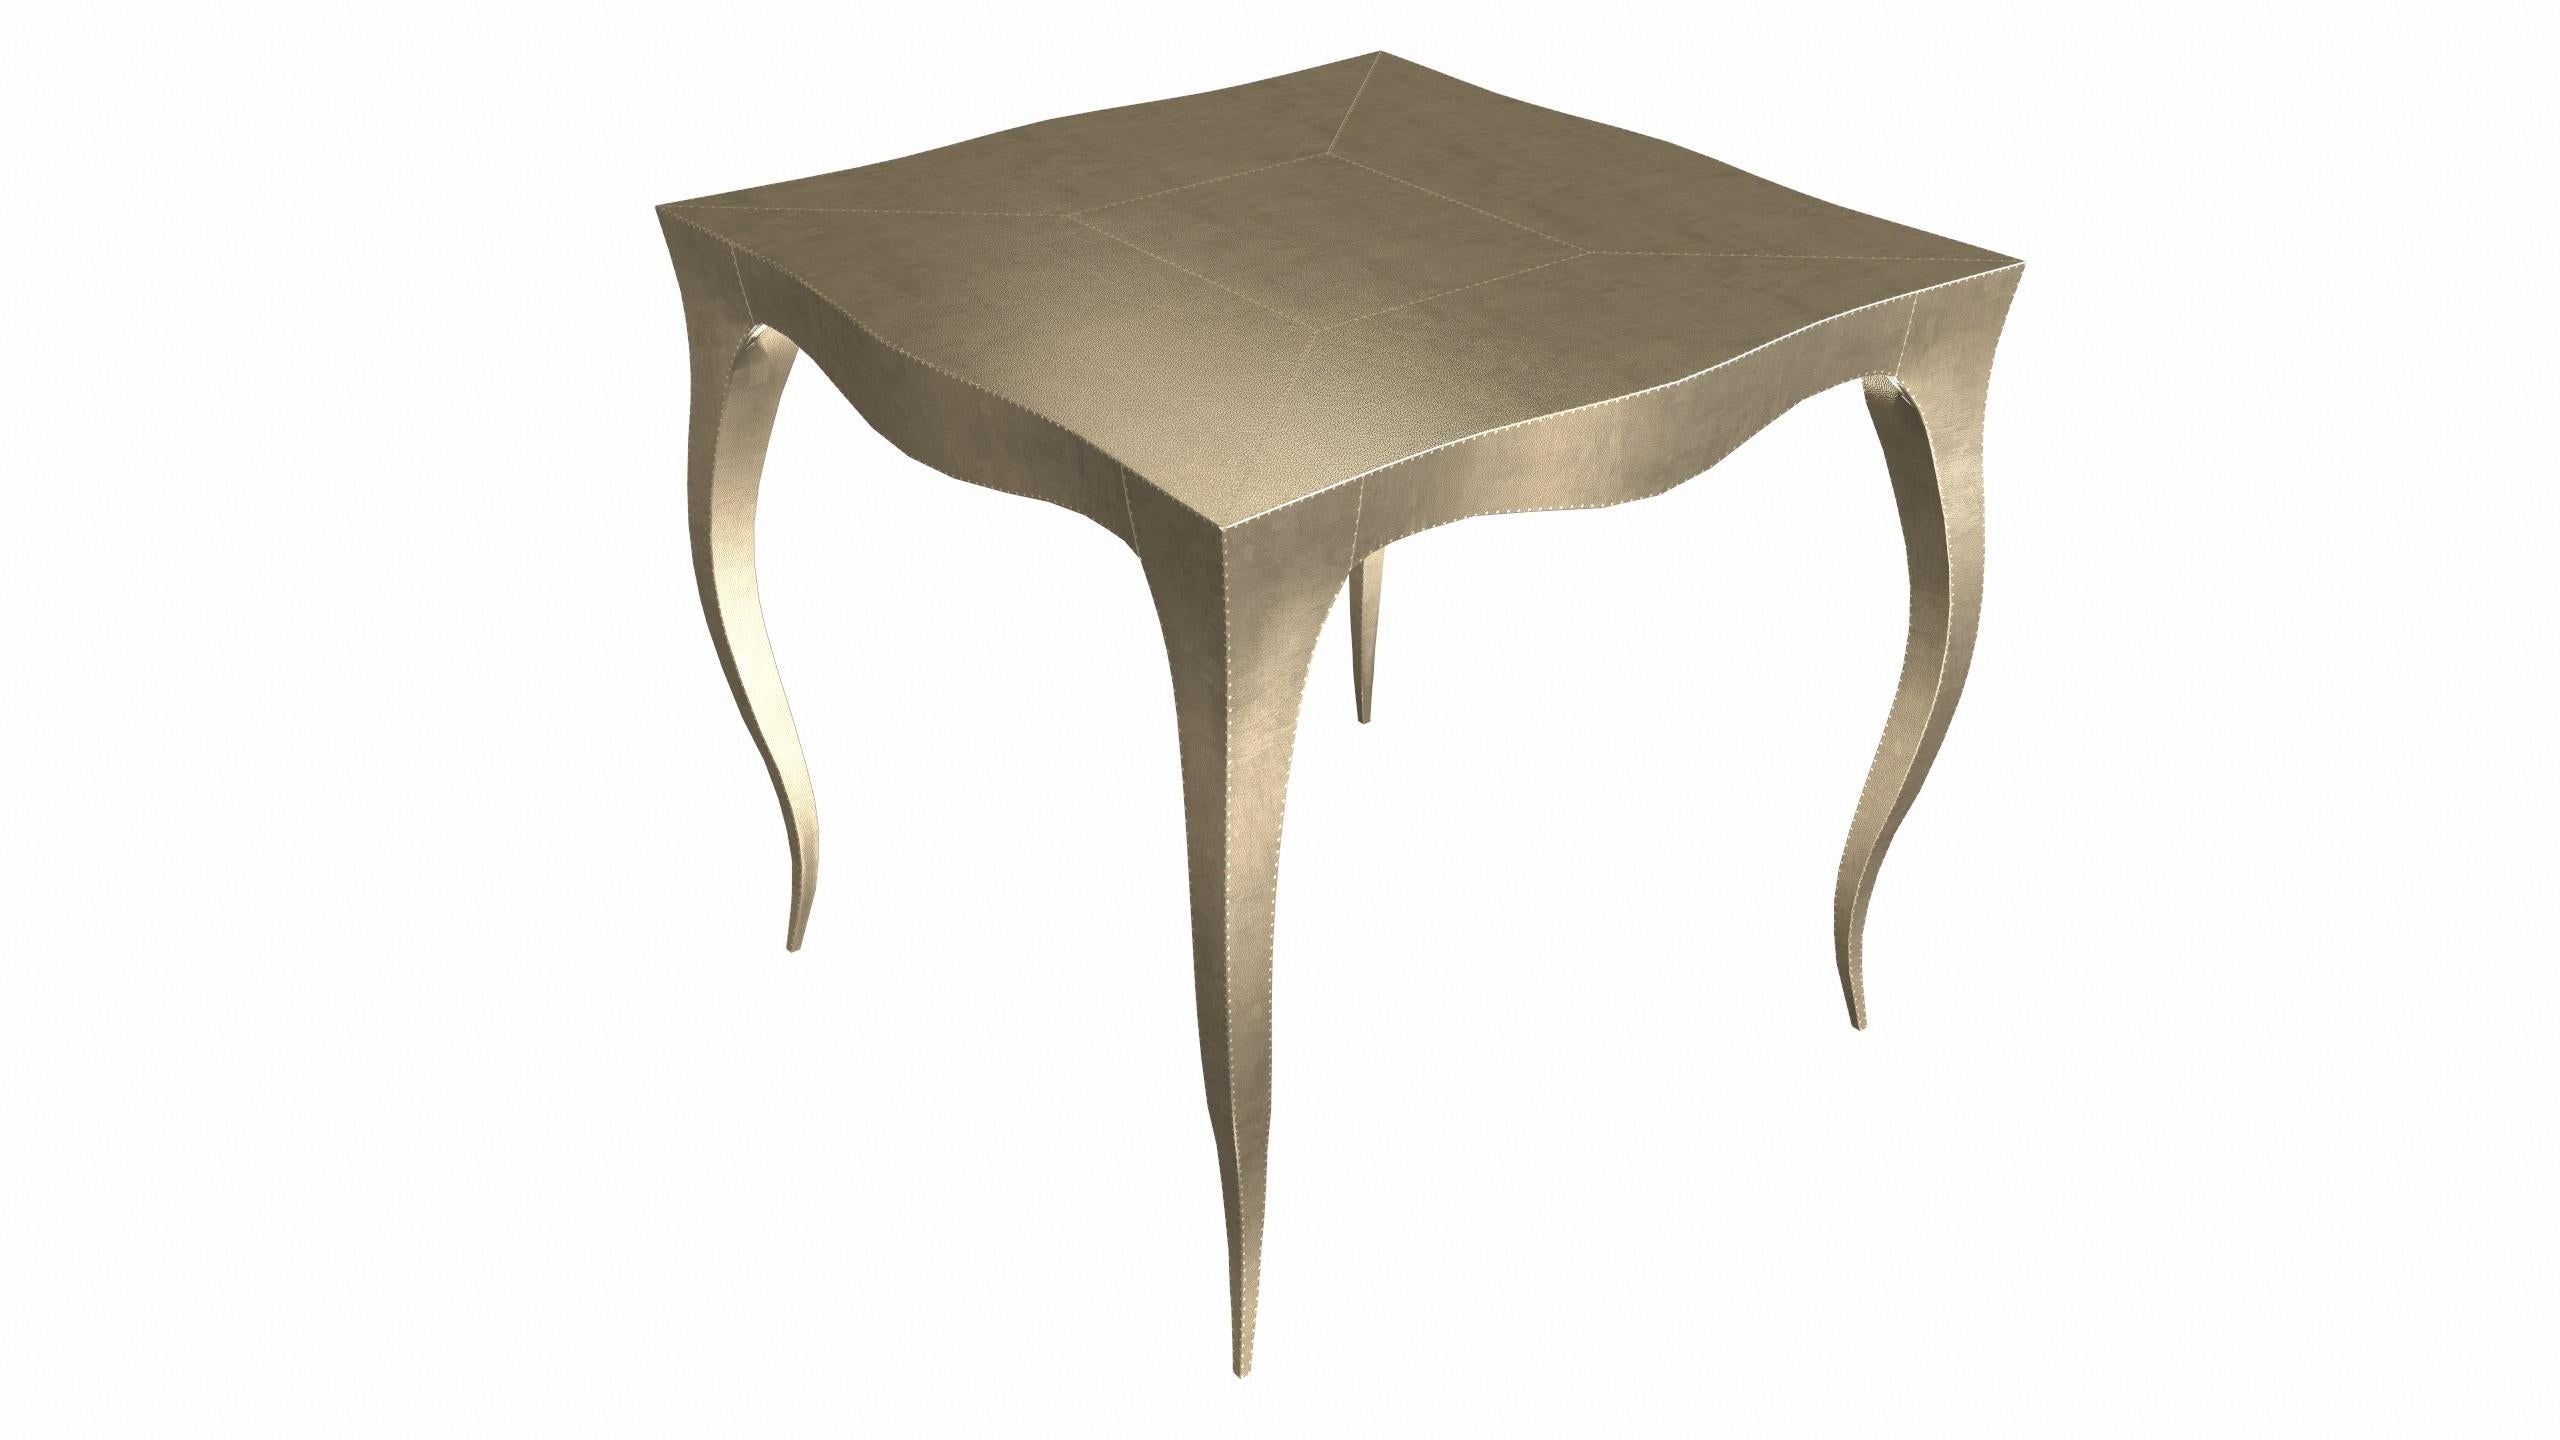 Metal Louise Art Deco Nesting and Stacking Tables Mid. Hammered Brass by Paul Mathieu For Sale